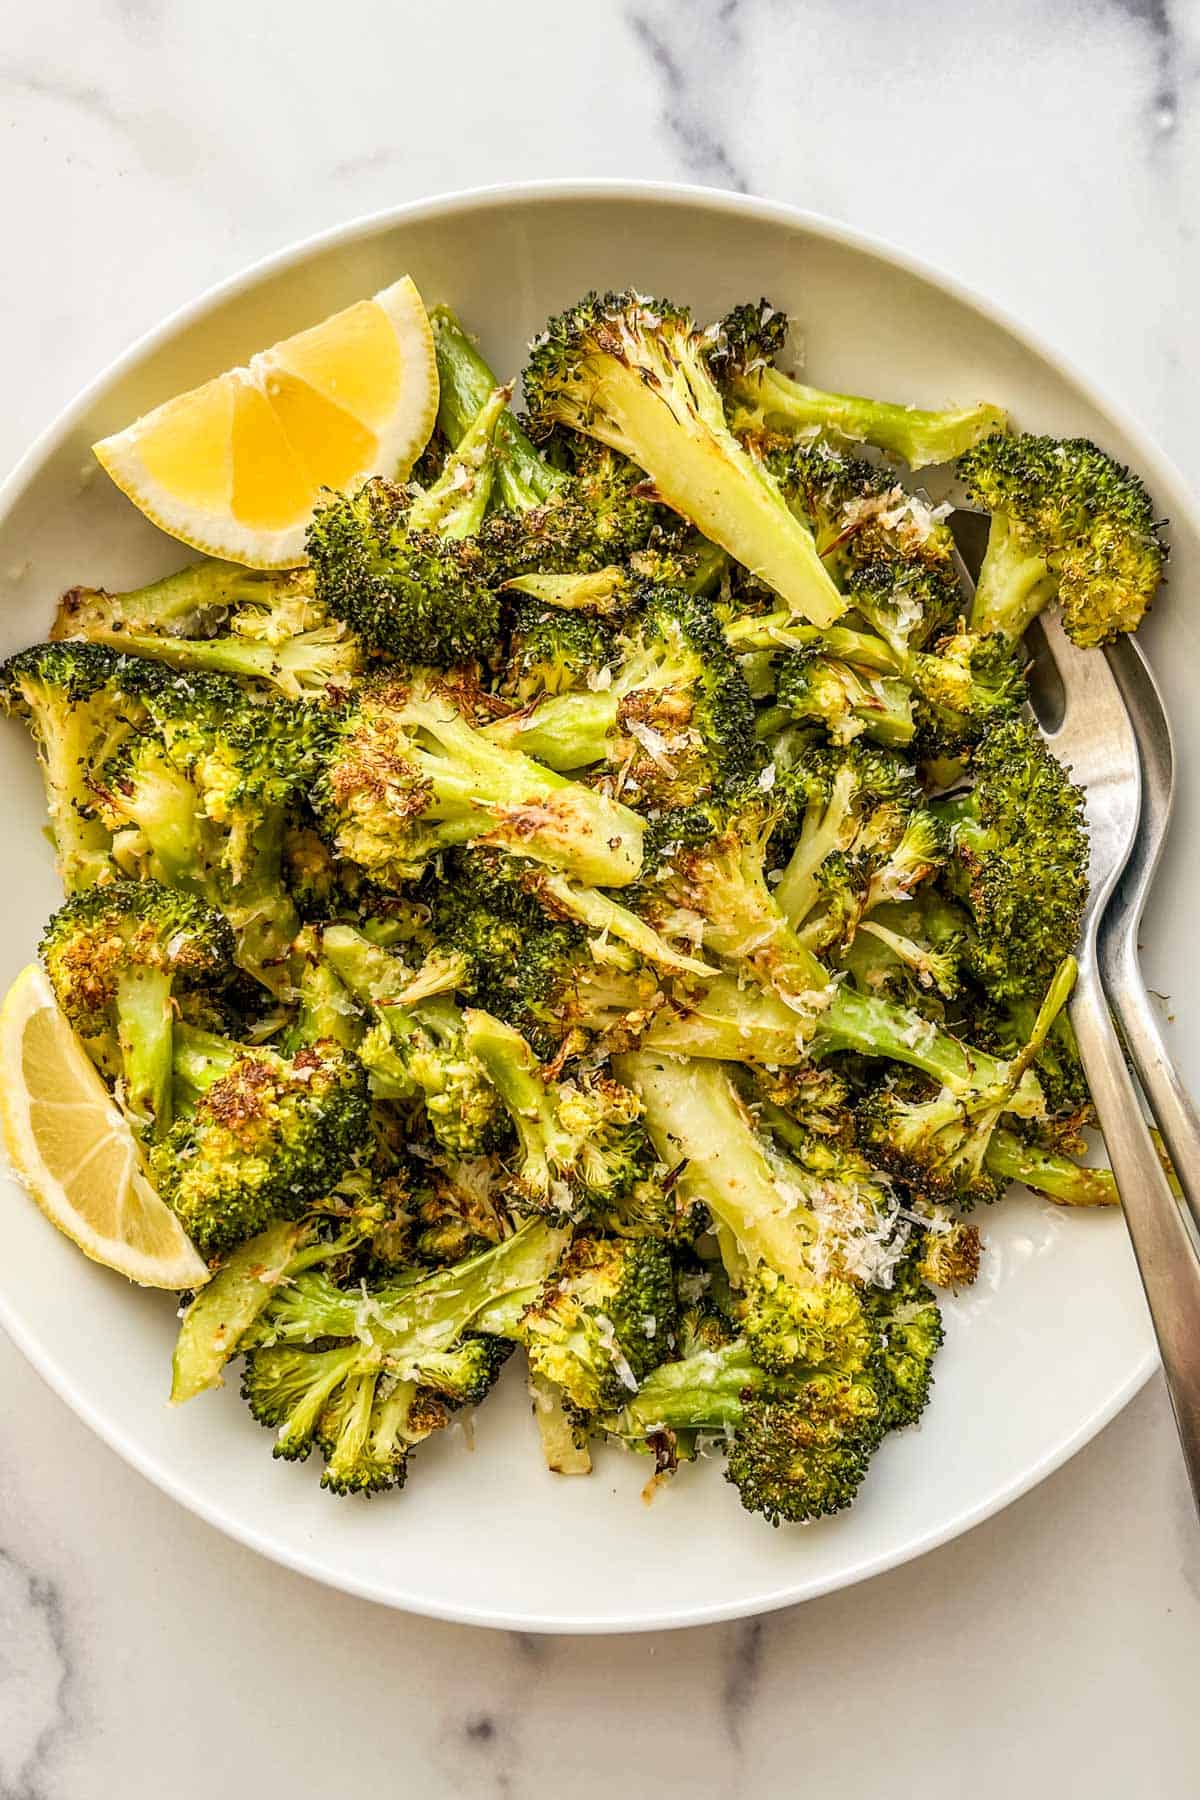 Parmesan roasted broccoli in a white bowl with silver serving utensils.